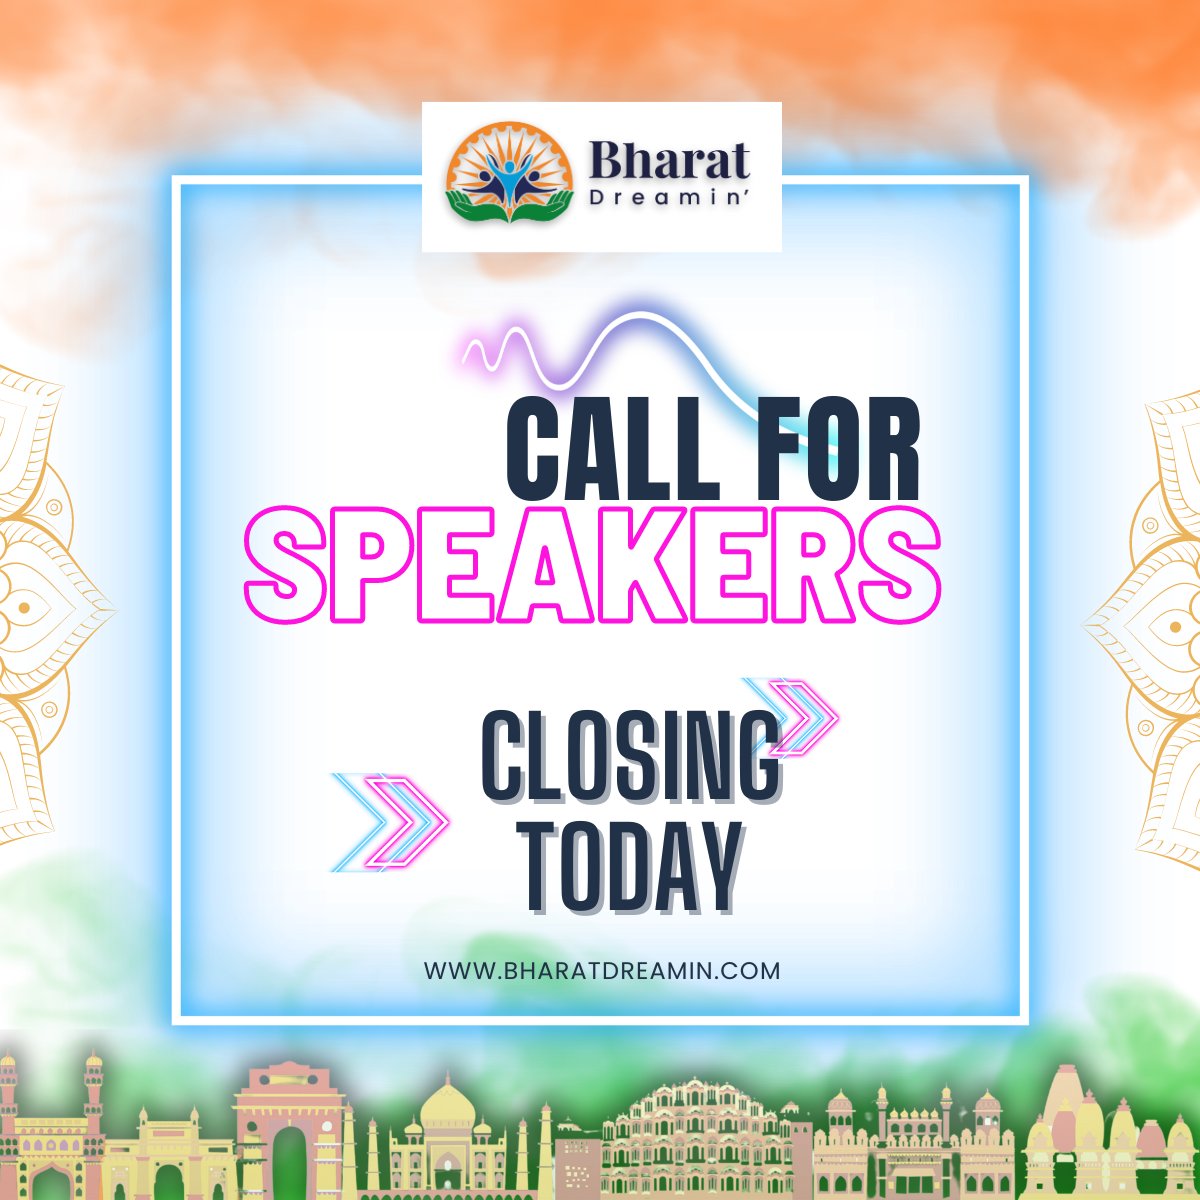 🎤📅 Friendly reminder to all experts and passionate speakers: the deadline to submit your session is today, May 12th. 🎤 Submit your topic before 10 pm IST: docs.google.com/forms/d/e/1FAI… bharatdreamin.com #bharatdreamin #trailblazercommunity